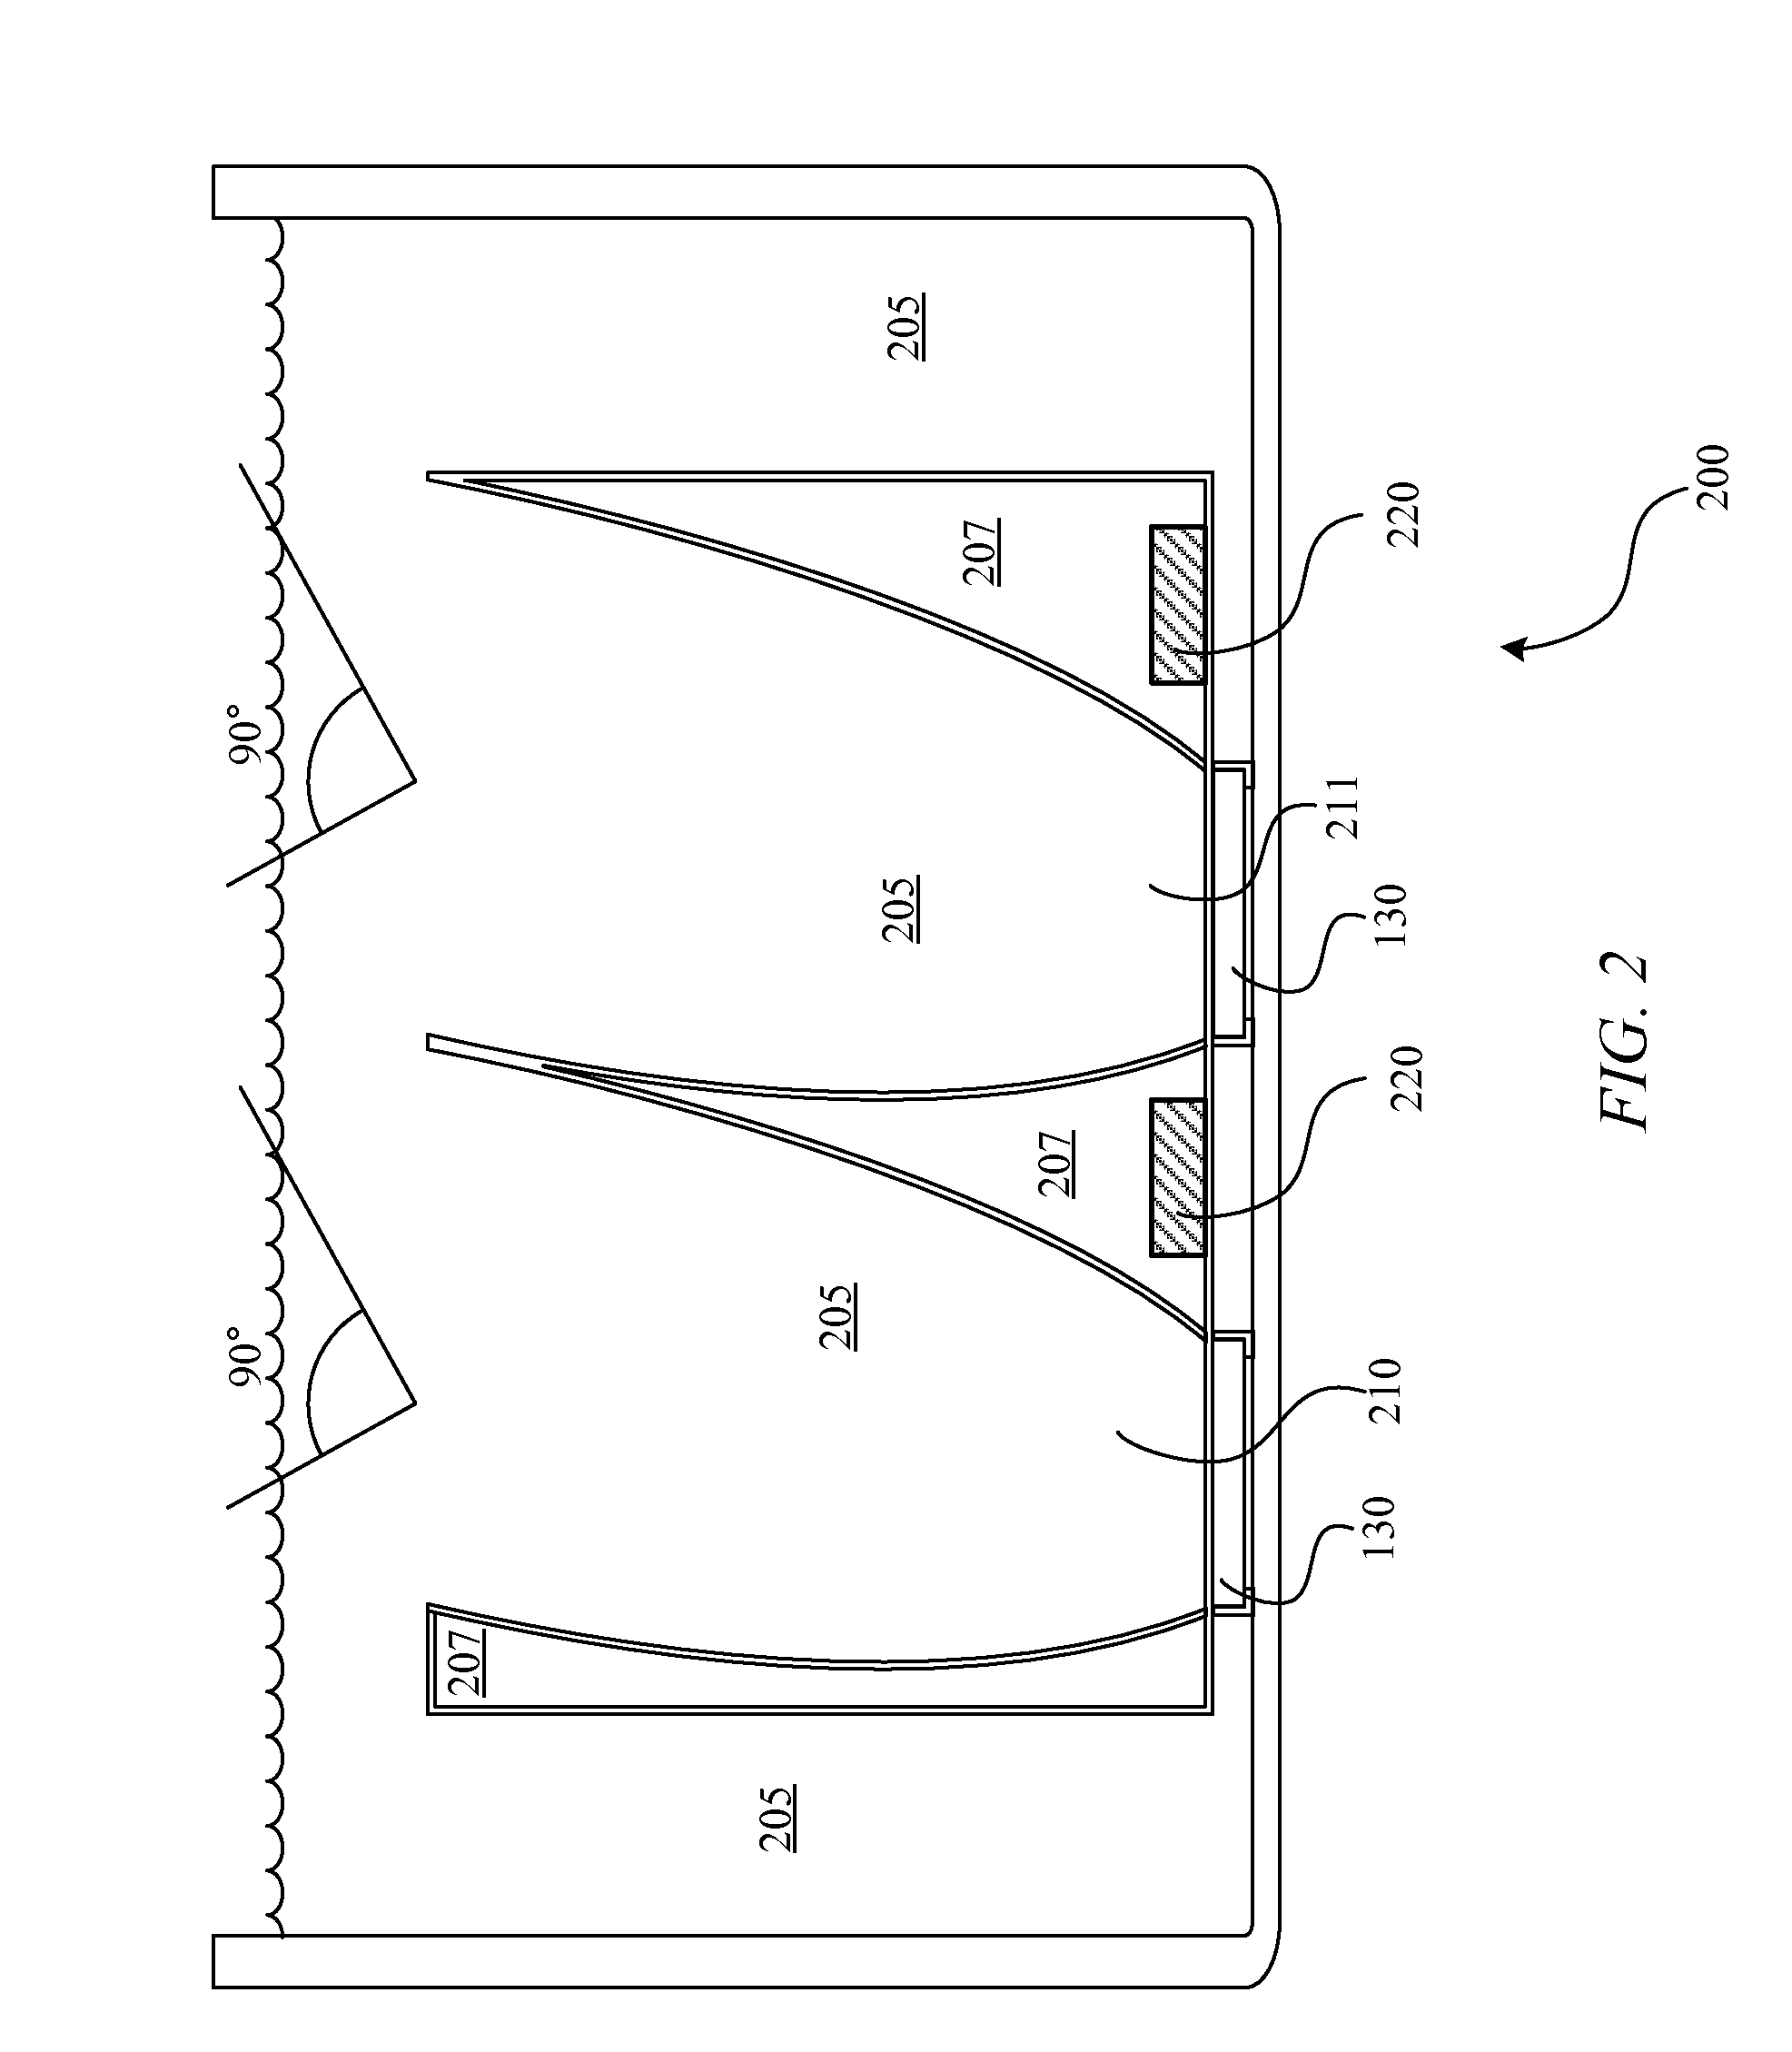 Asymmetric Parabolic Compound Concentrator With Photovoltaic Cells